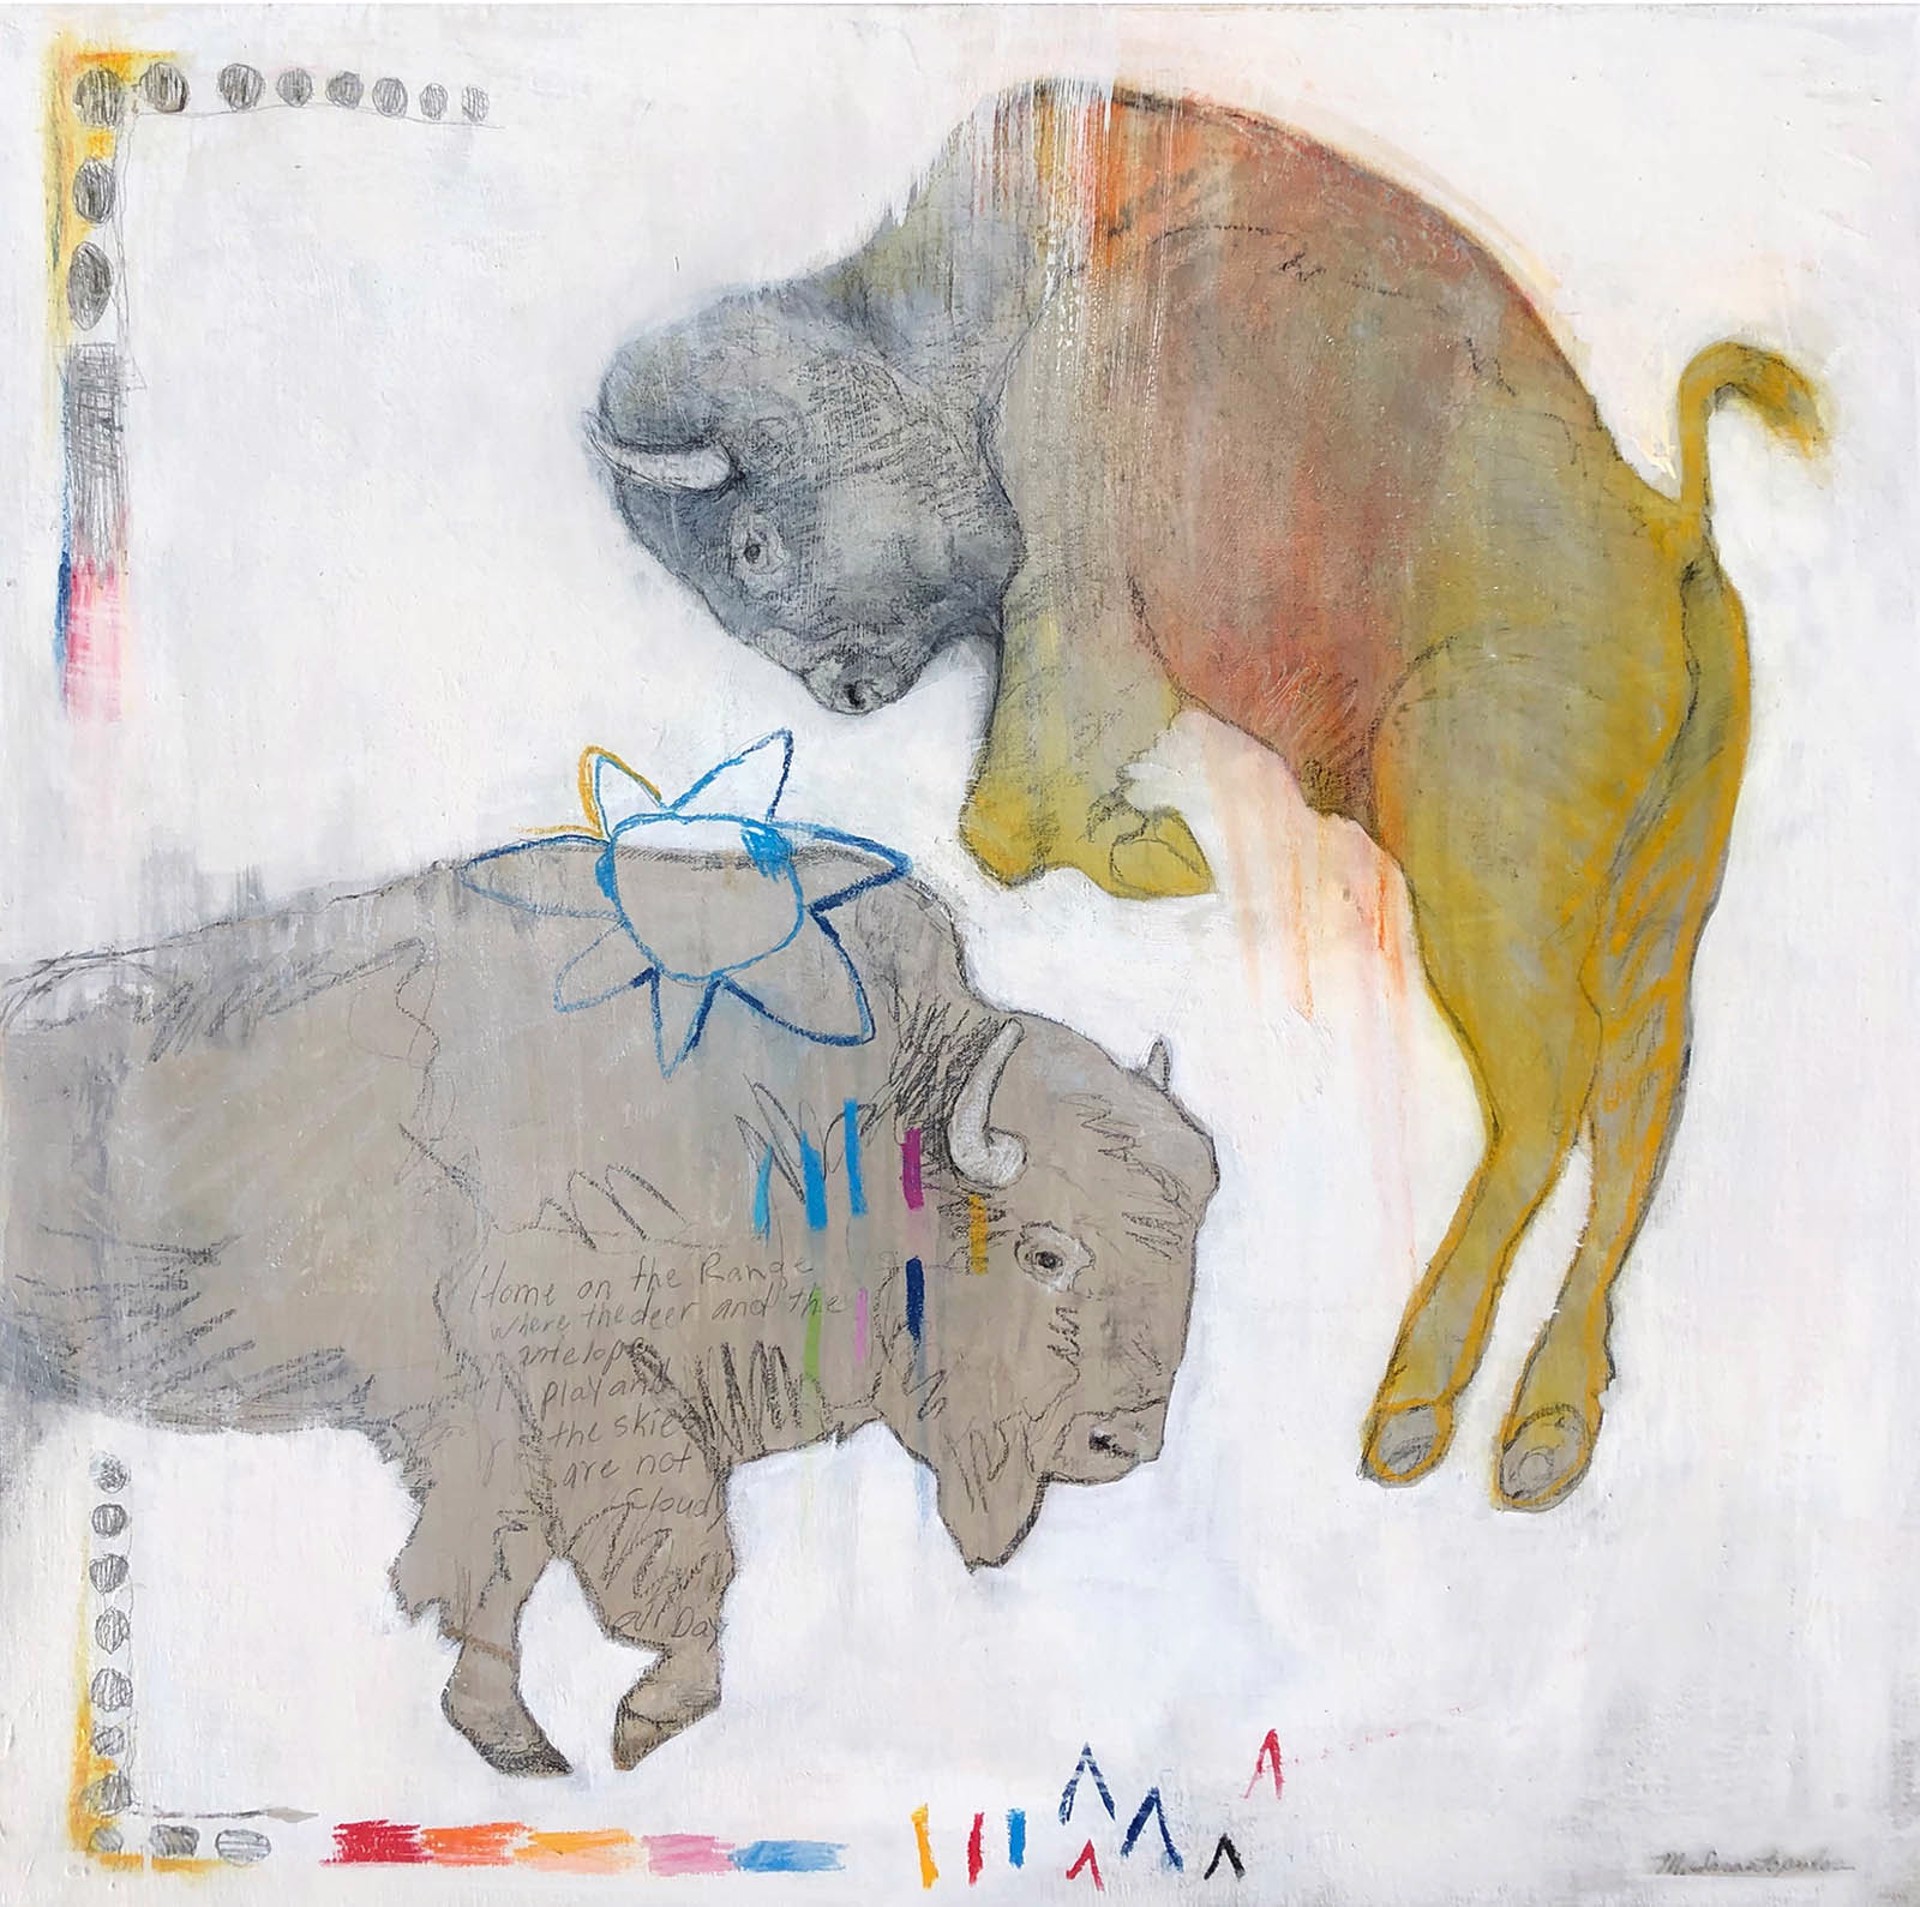 Original Mixed Media Painting Featuring A Walking Bison And A Leaping Bison Sketched Over White Background With Rainbow Linear Details